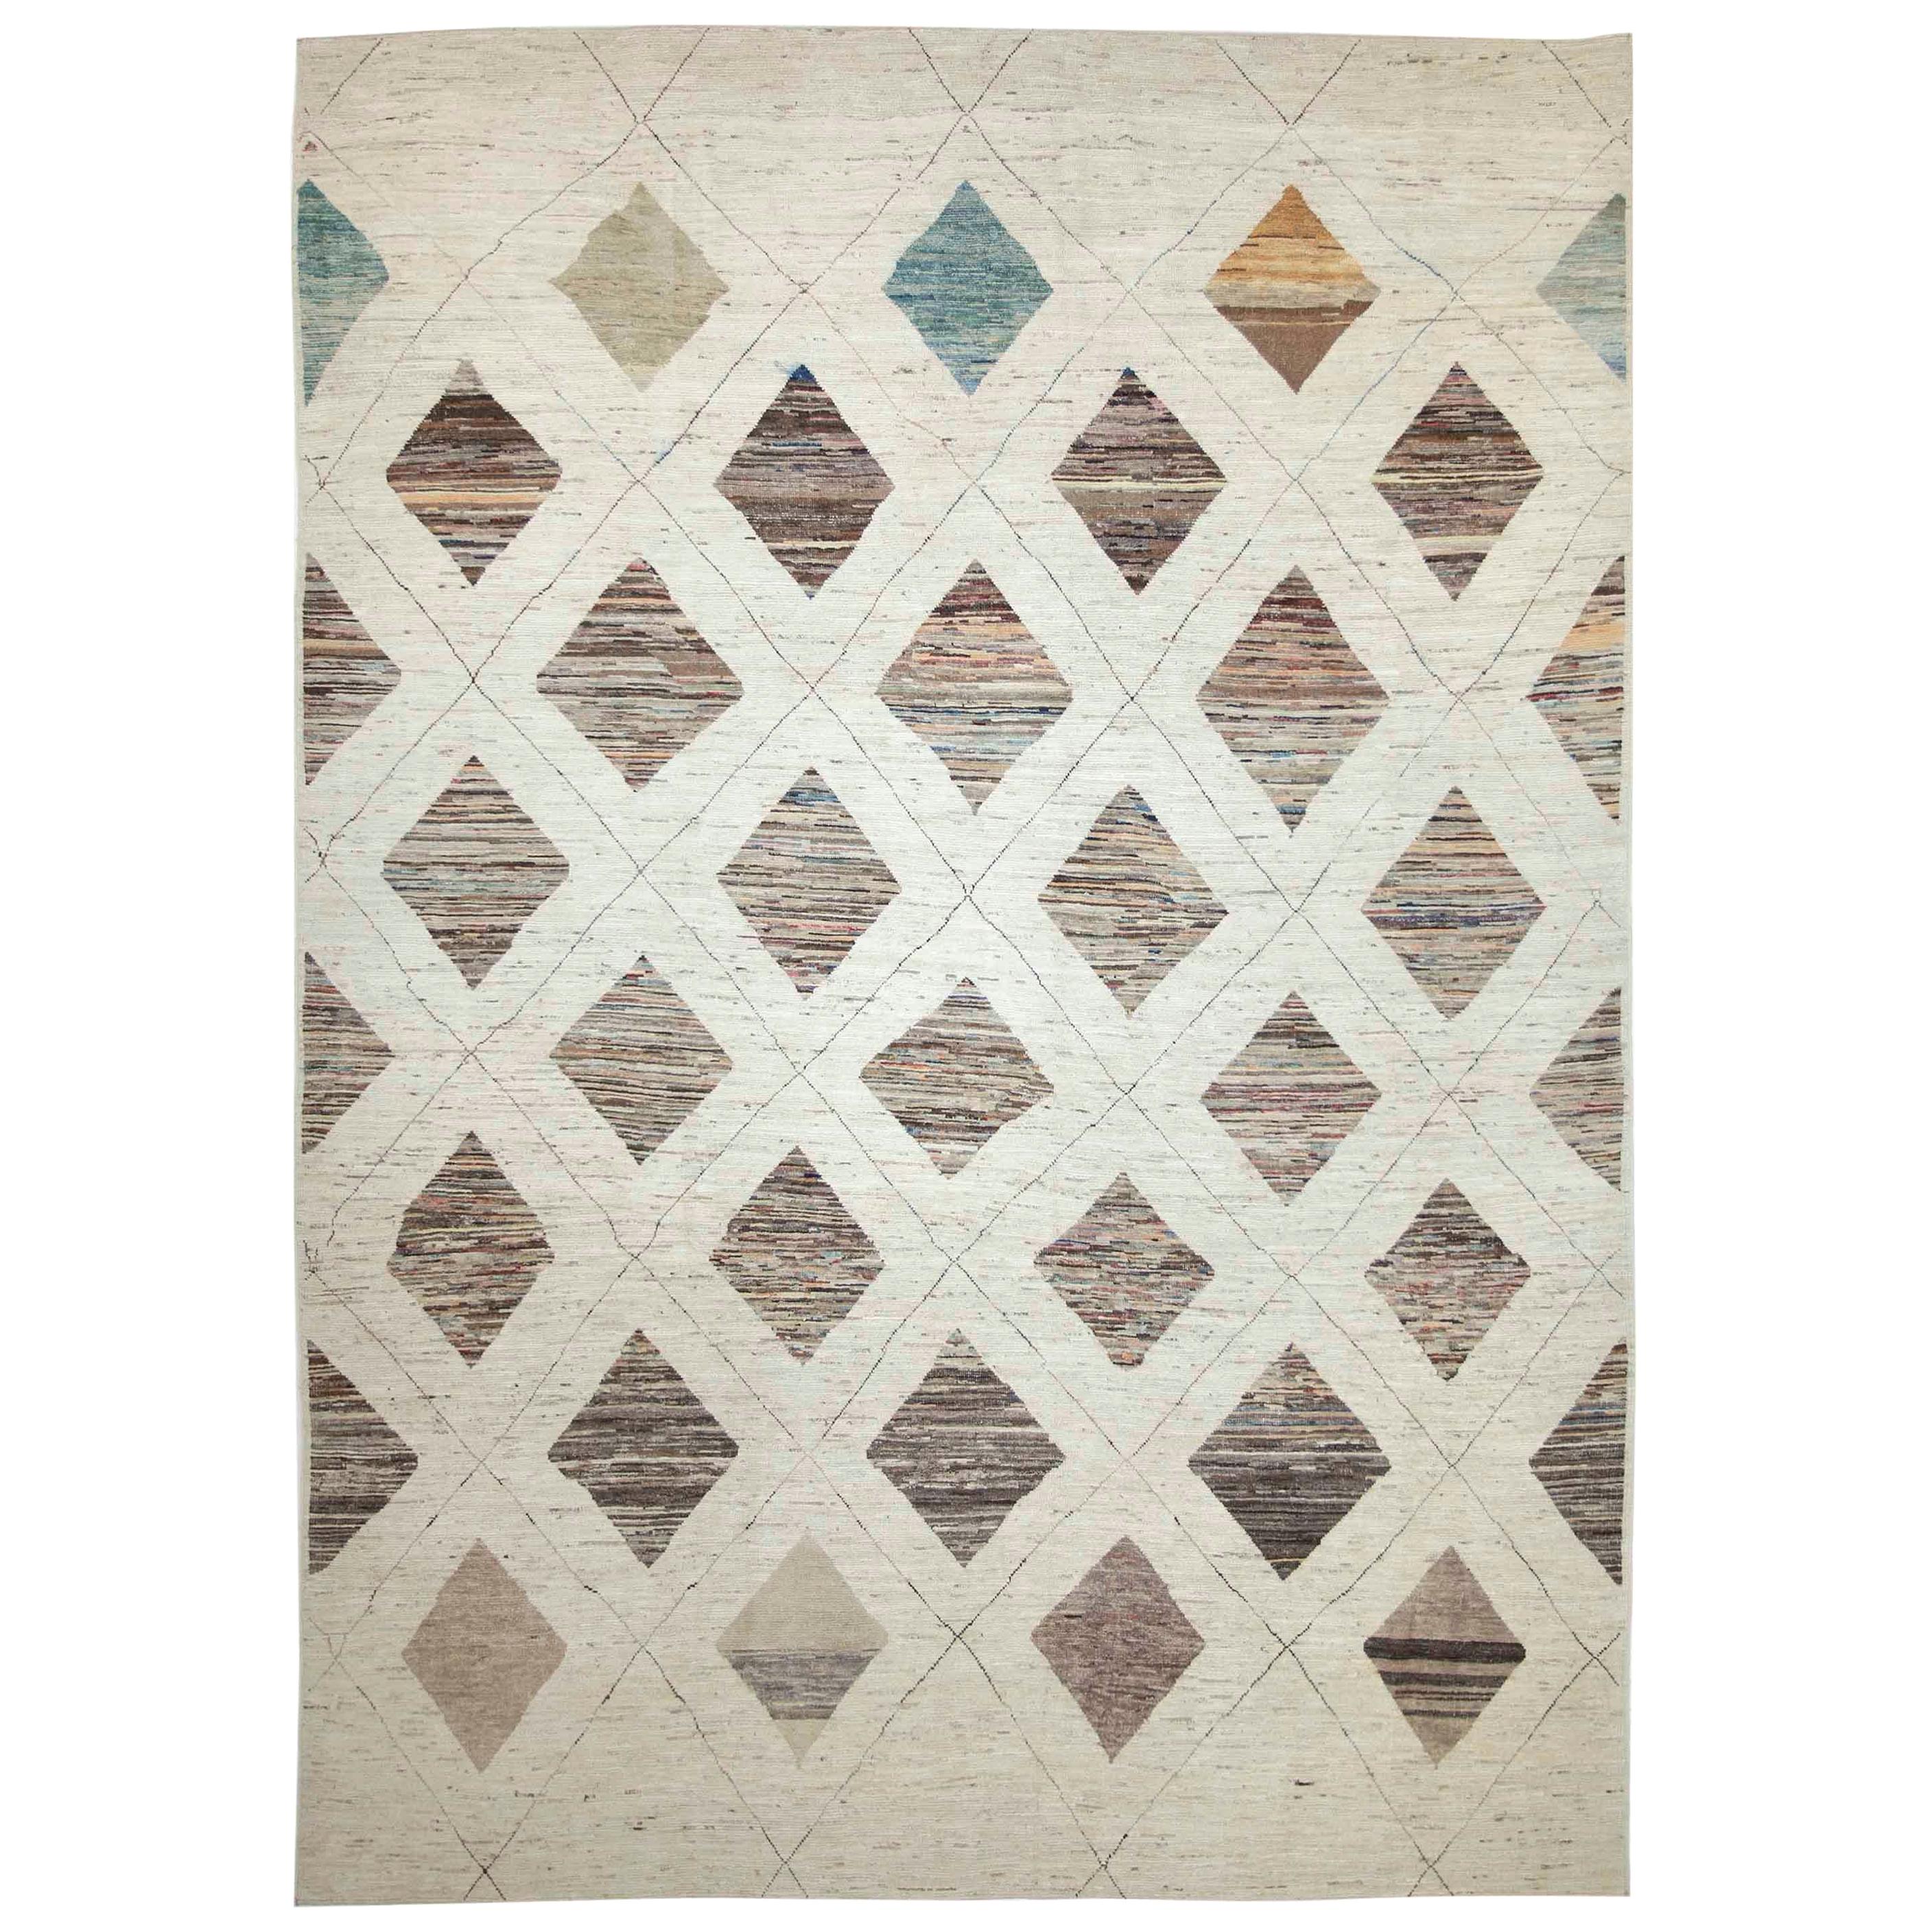 Modern Afghan Moroccan Style Rug with Colored Tribal Diamonds on Ivory Field